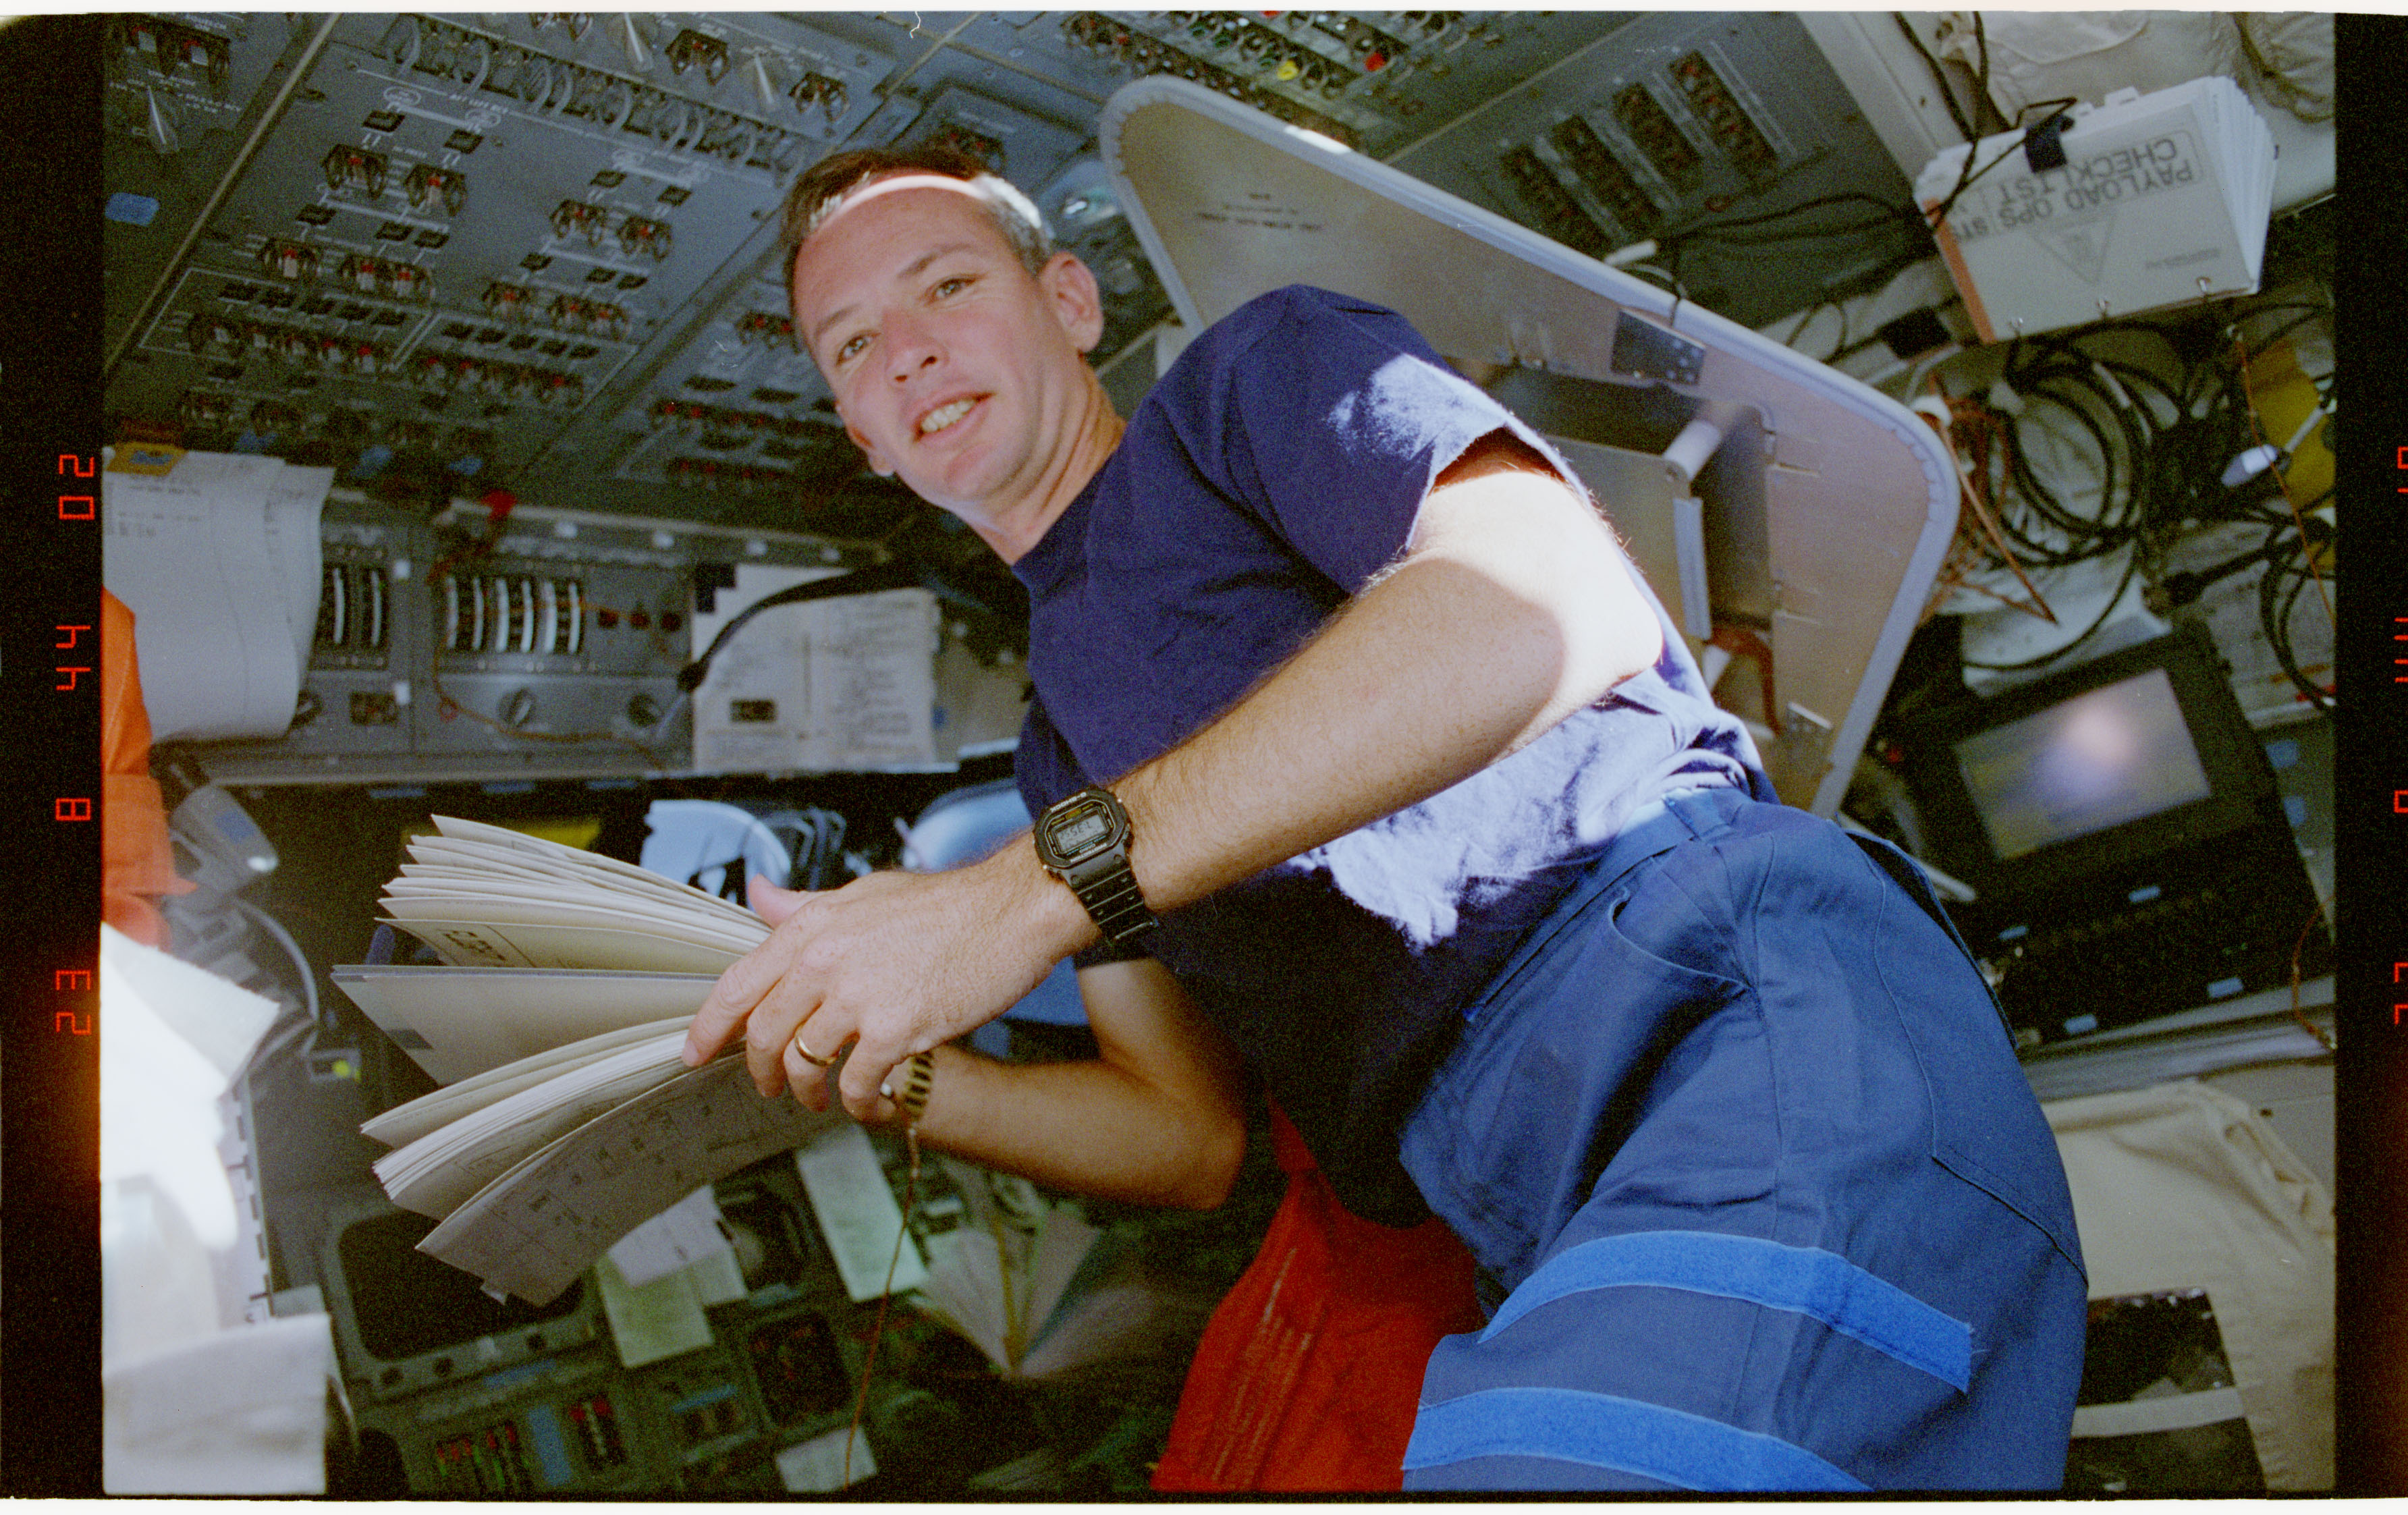 STS057-34-019 - STS-057 - Candid view of a crewmember in the aft flight deck.